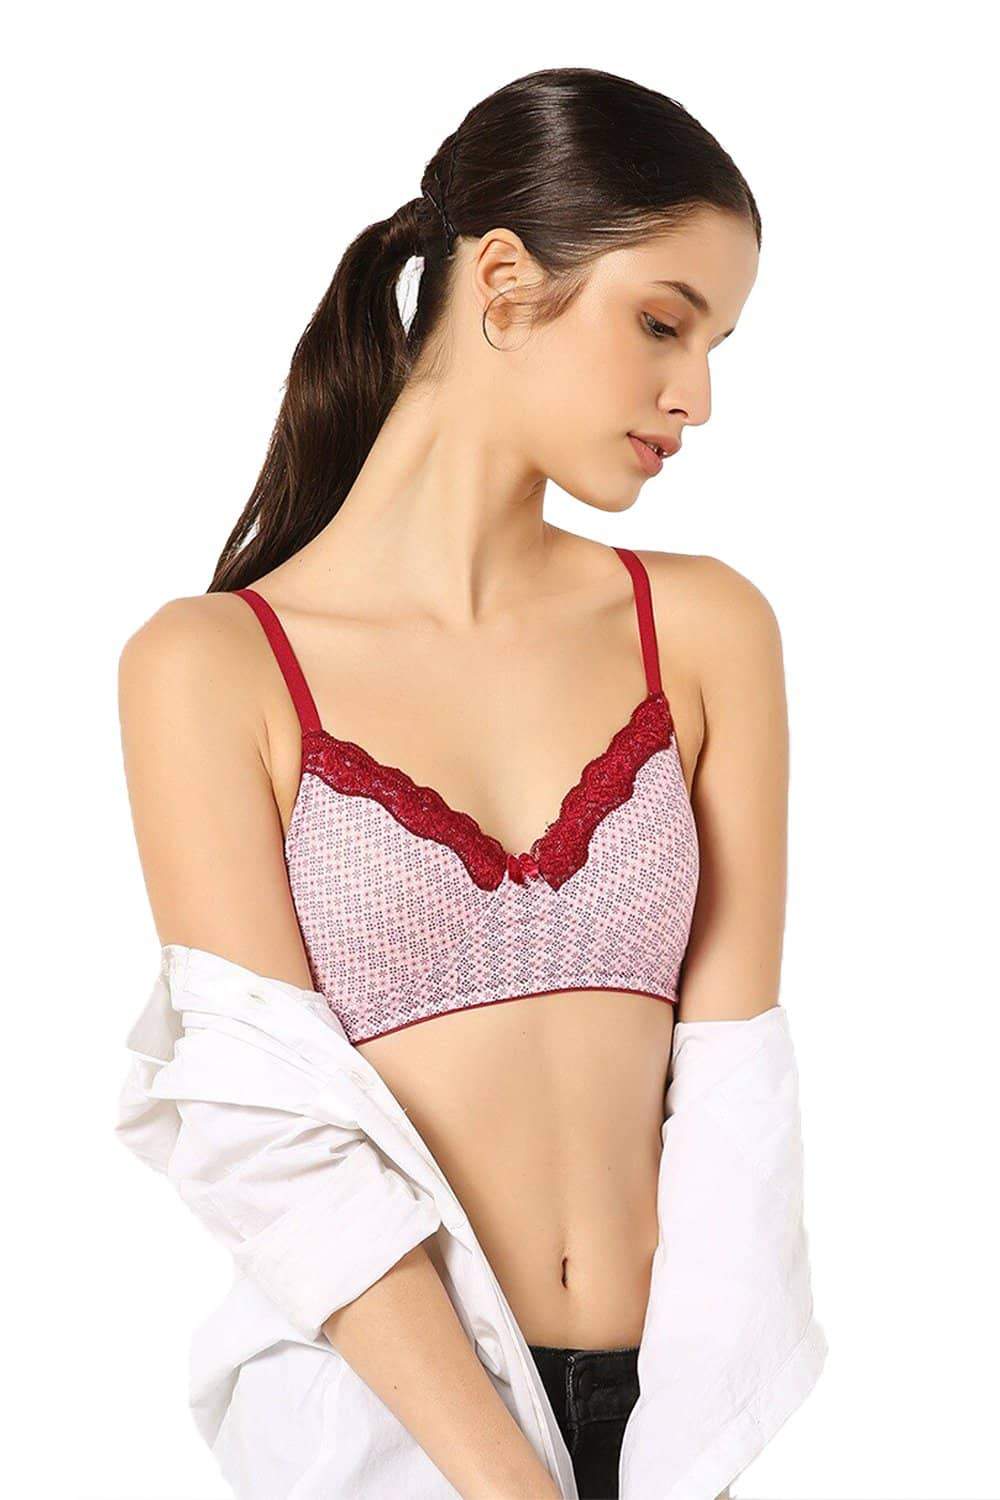   Essentials Women's Cotton and Lace Lightly